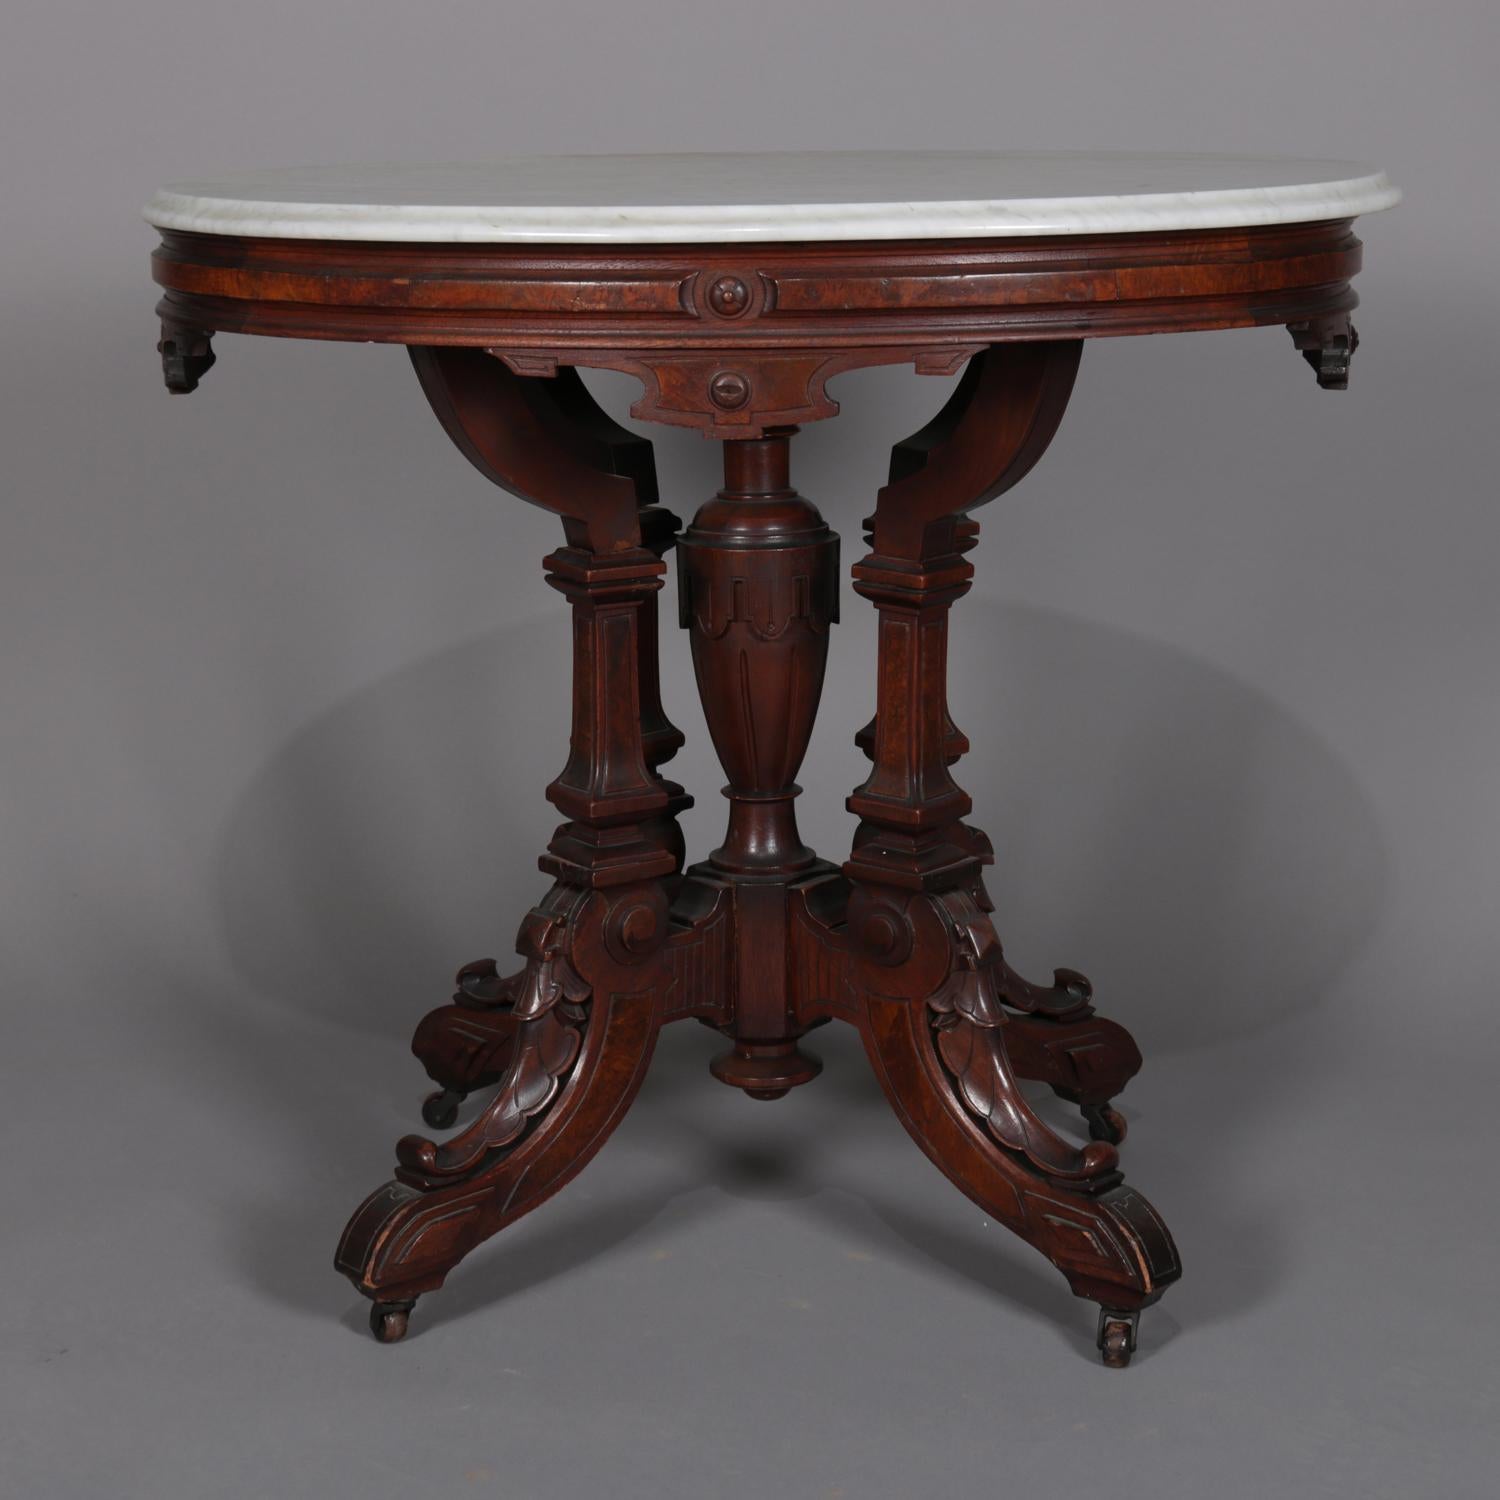 High Victorian Antique Eastlake Carved Walnut and Burl Marble Top Oval Centre Table, circa 1870